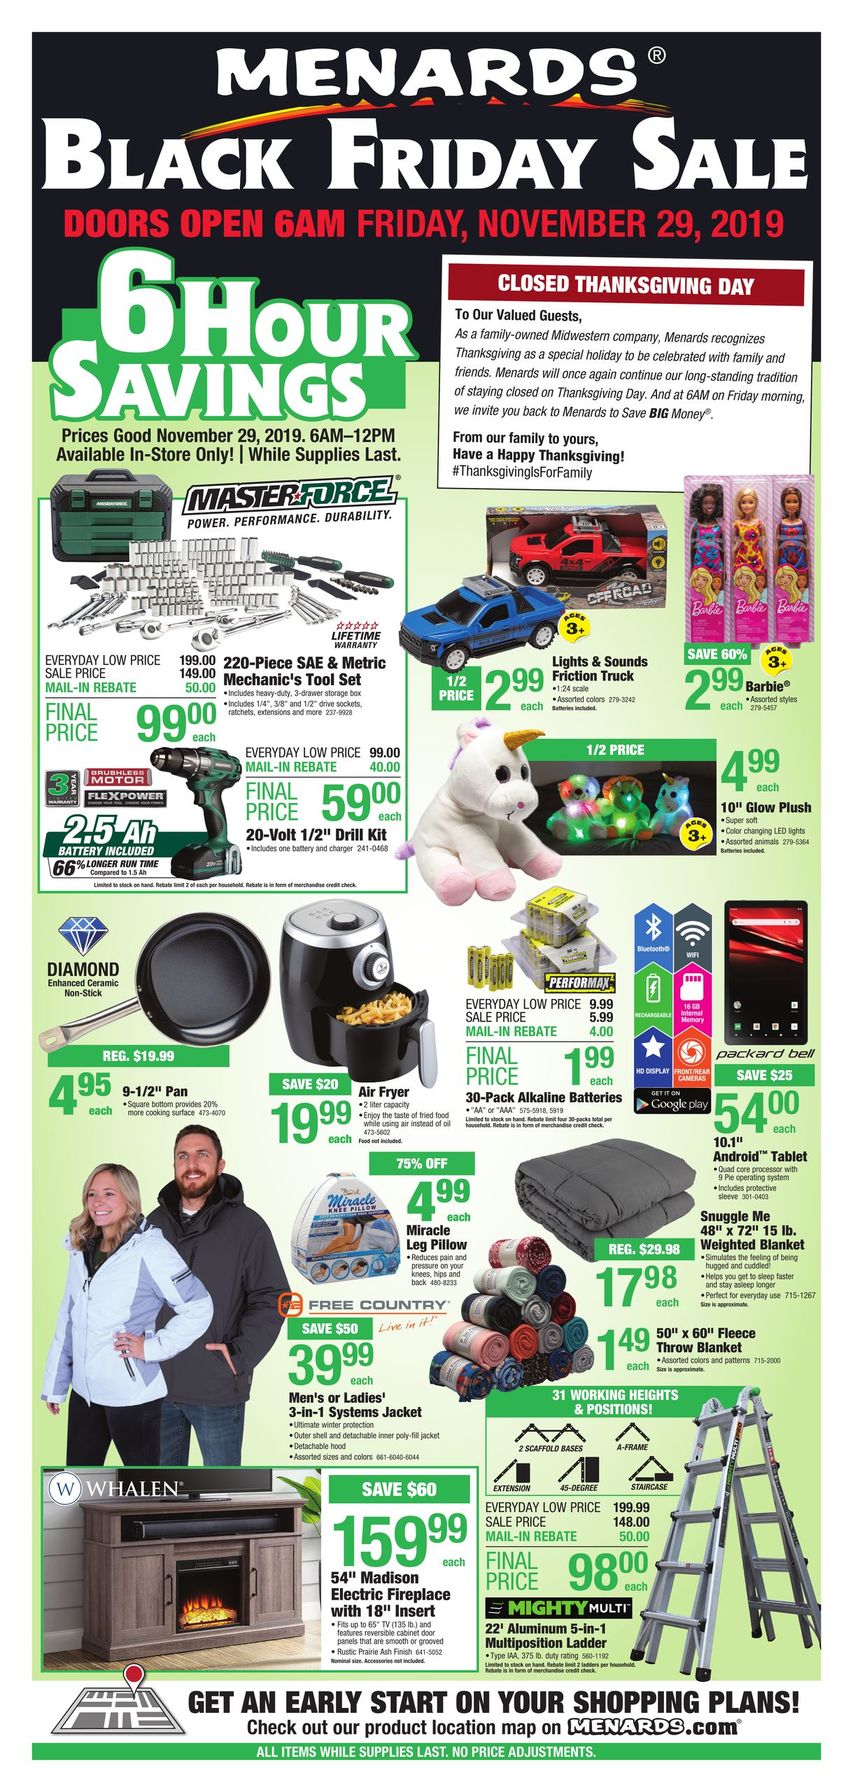 Menards Black Friday Ad 2019 - Sale Live Now - Will Hotels Have Black Friday Deals